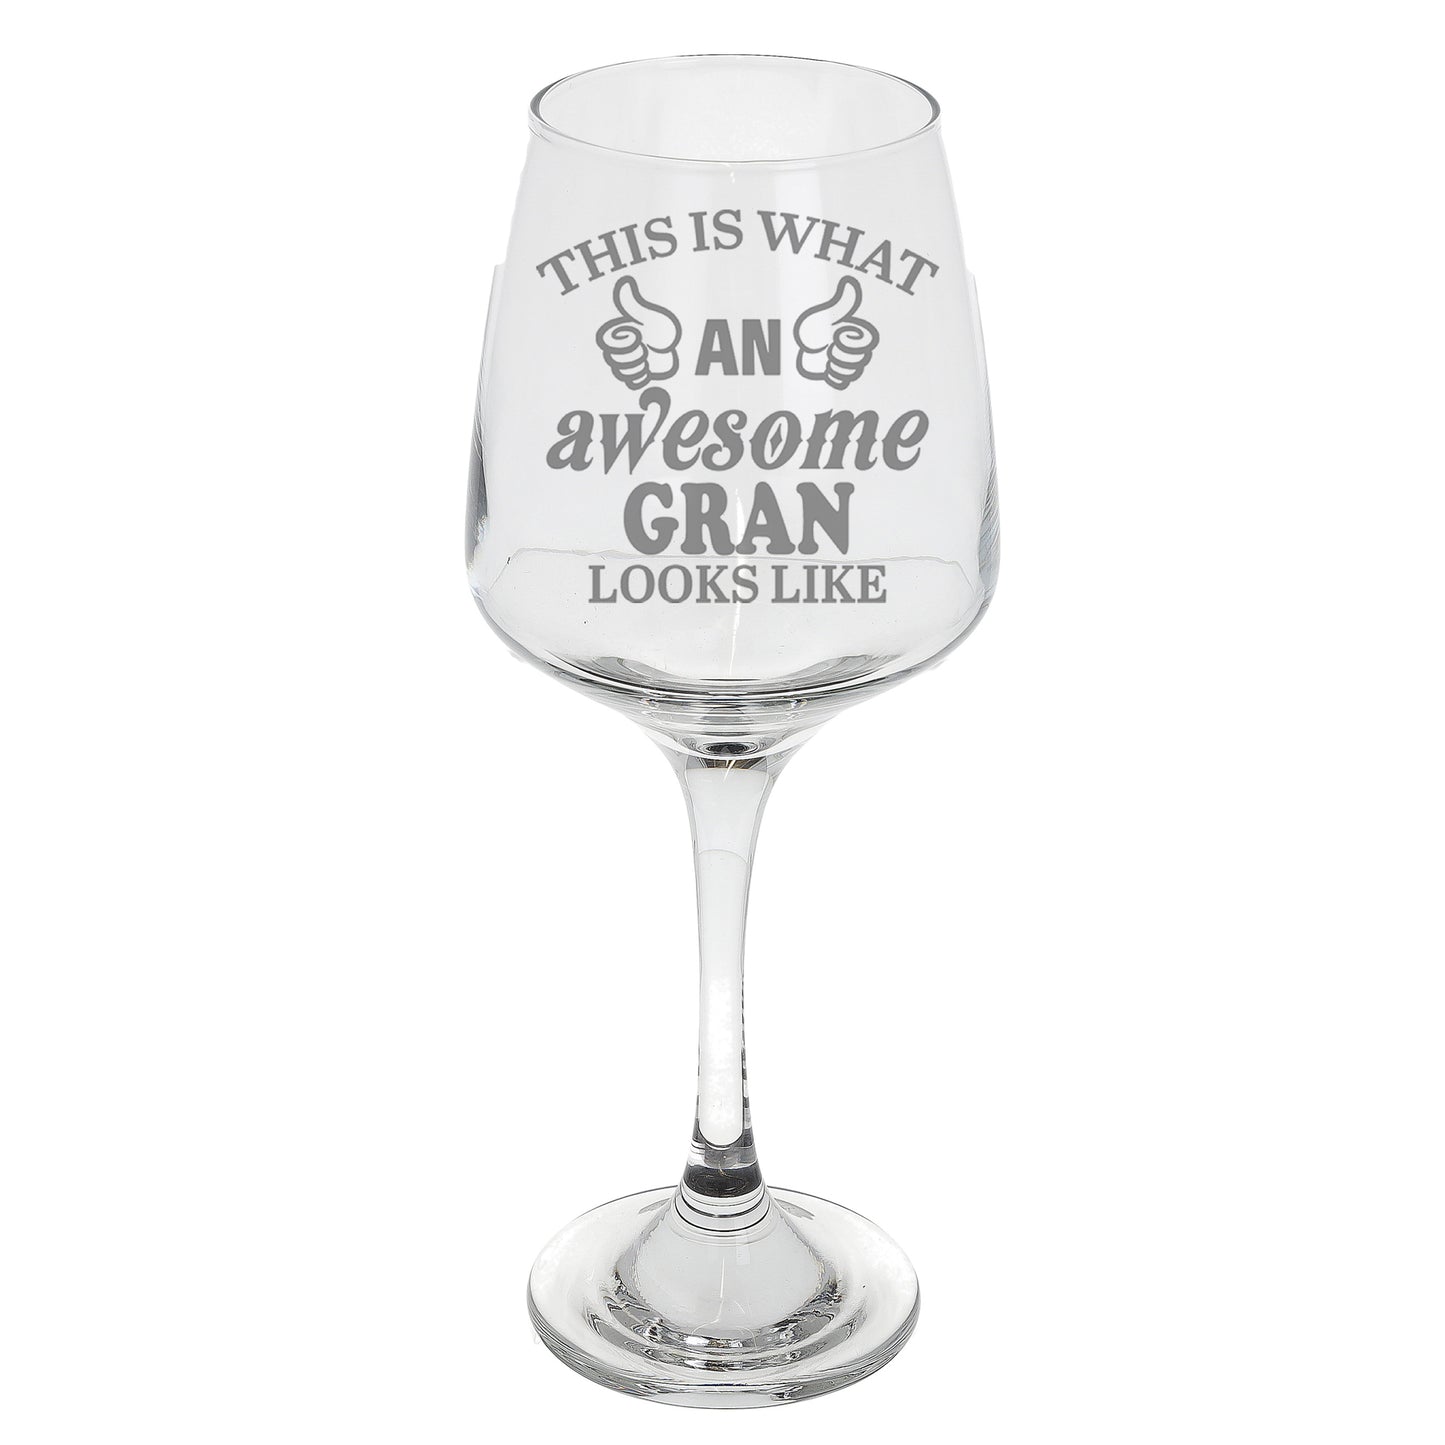 "This Is What An Awesome Person Looks Like" Novelty Engraved Wine Glass  - Always Looking Good -   